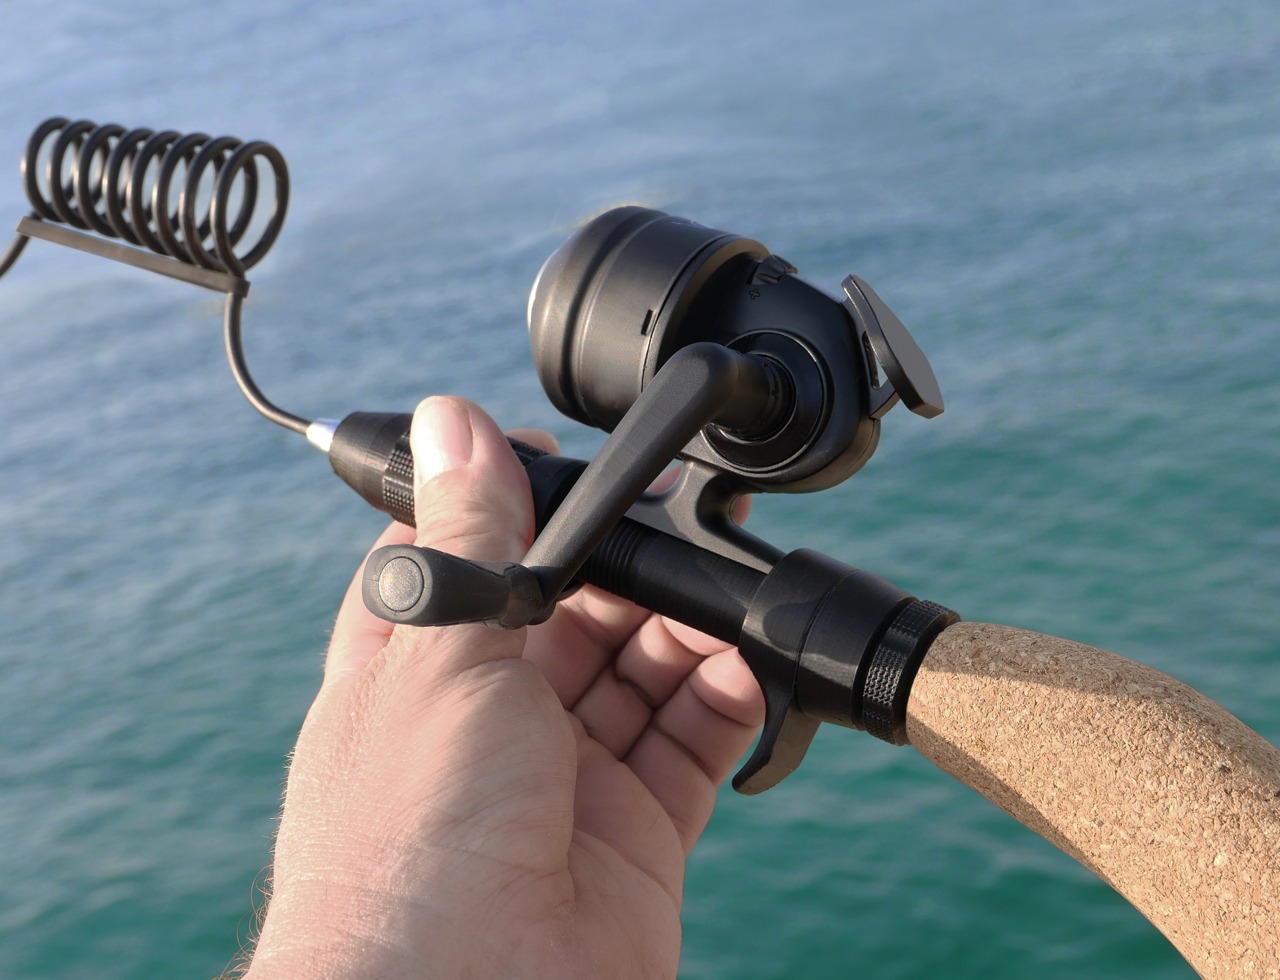 https://www.yankodesign.com/images/design_news/2022/08/fishing-rod-with-a-gopro-mount-lets-you-capture-your-high-adrenaline-trophy-catch-on-video/travel_fishing_system_for_shore_boat_ice_and_snorkel_fishing_3.jpg